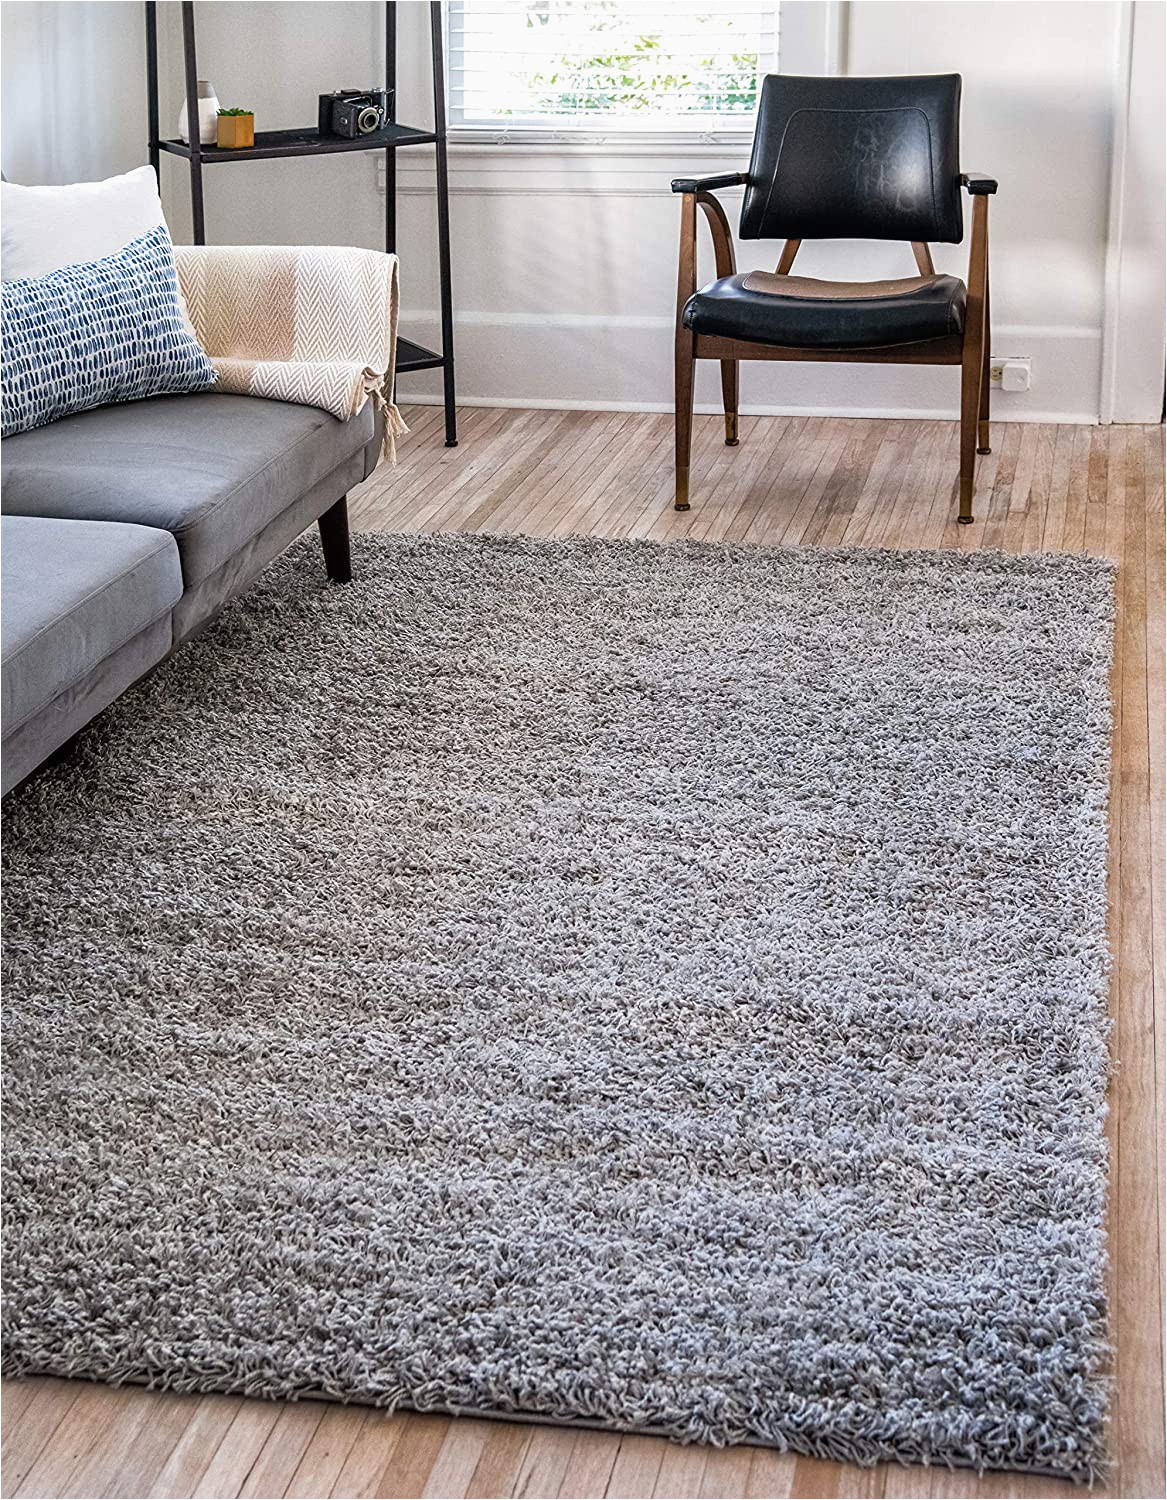 Area Rugs for Gray Floors Unique Loom solo solid Shag Collection Modern Plush Cloud Gray area Rug 5 0 X 8 0